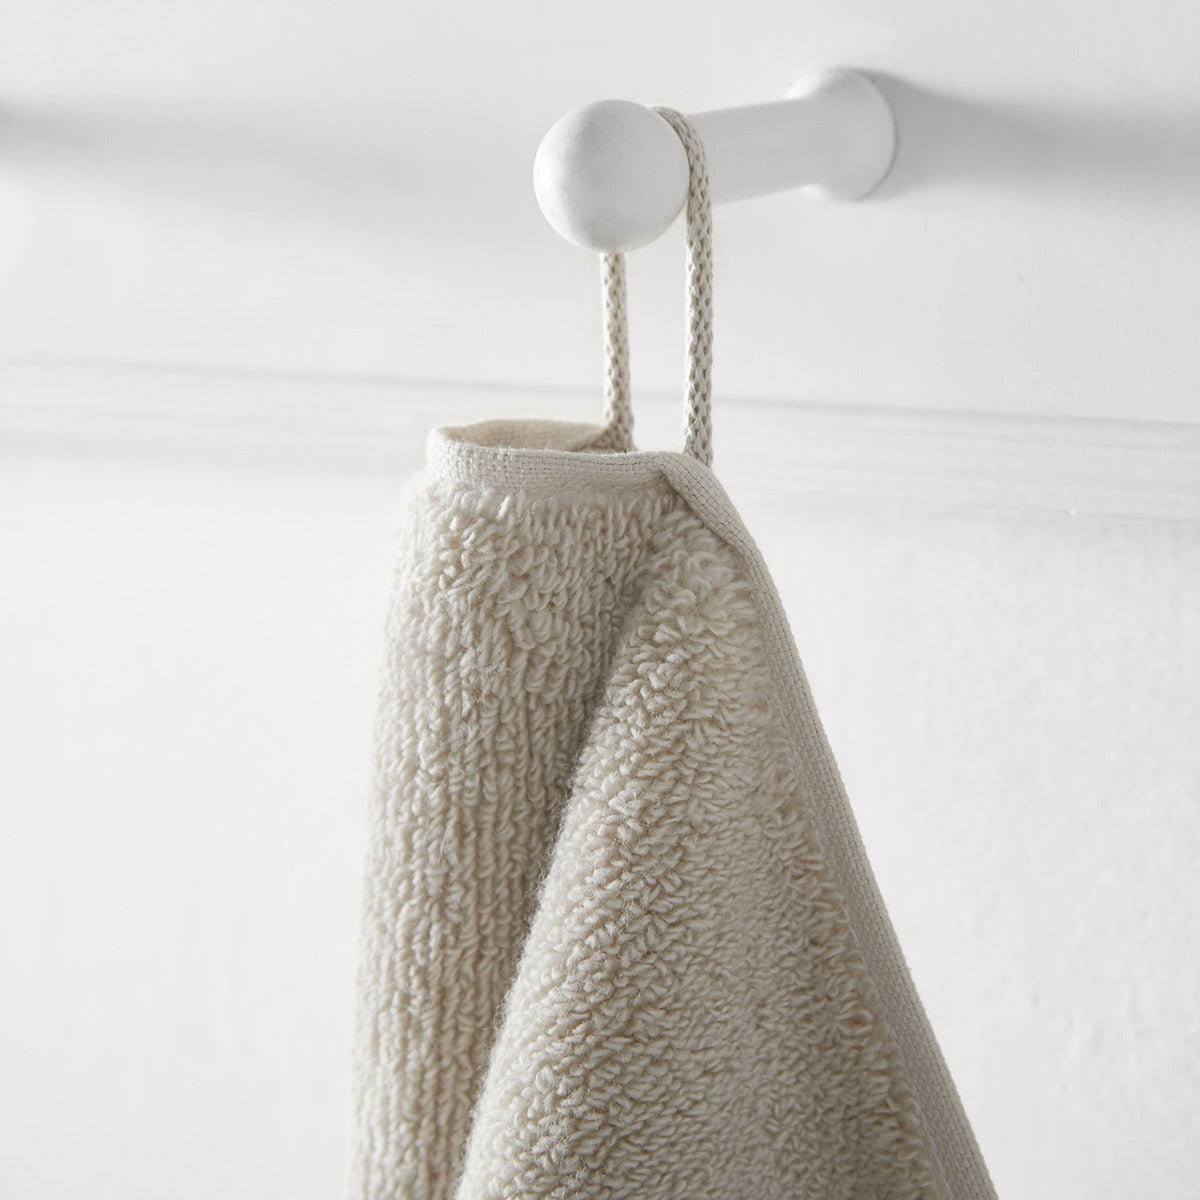 Luxury Towels: How to Choose the Best Quality Bath Towels – Peacock Alley